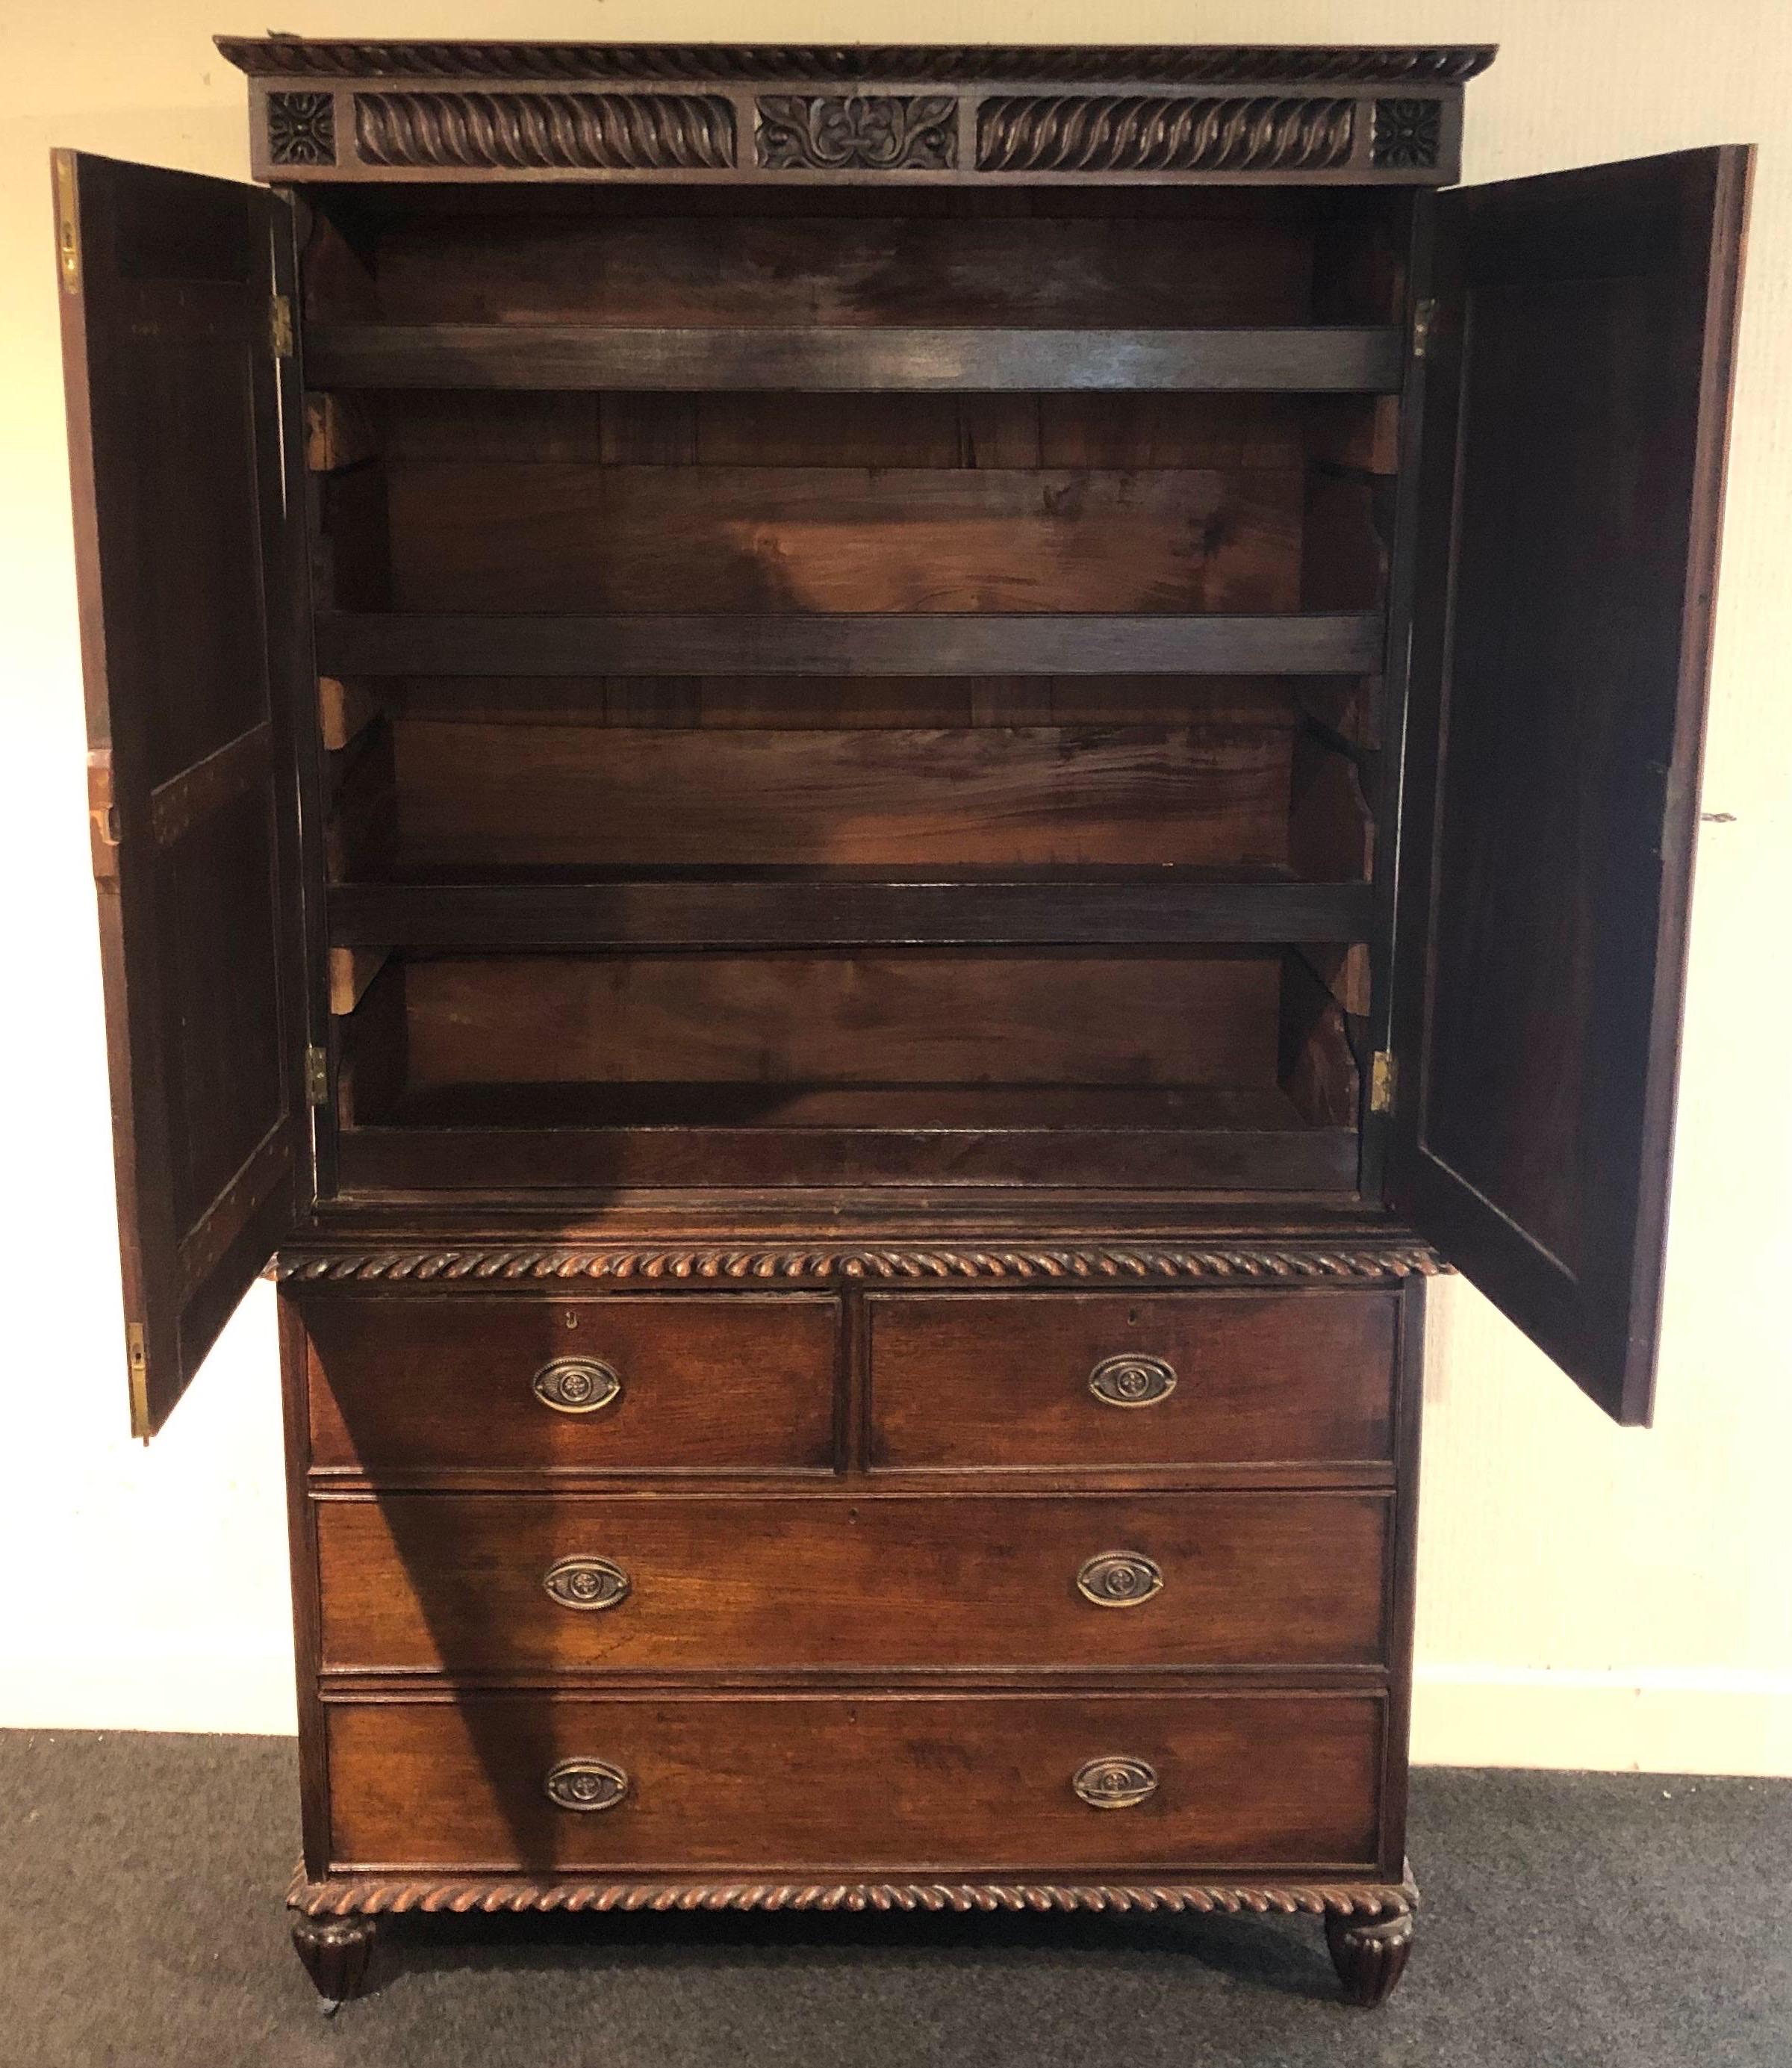 19th century Anglo Indian linen press. All carved rosewood. Two carved door panels open to 4 sliding shelves, resting on a base with carved gadrooning and 2 small drawers over 2 larger drawers.